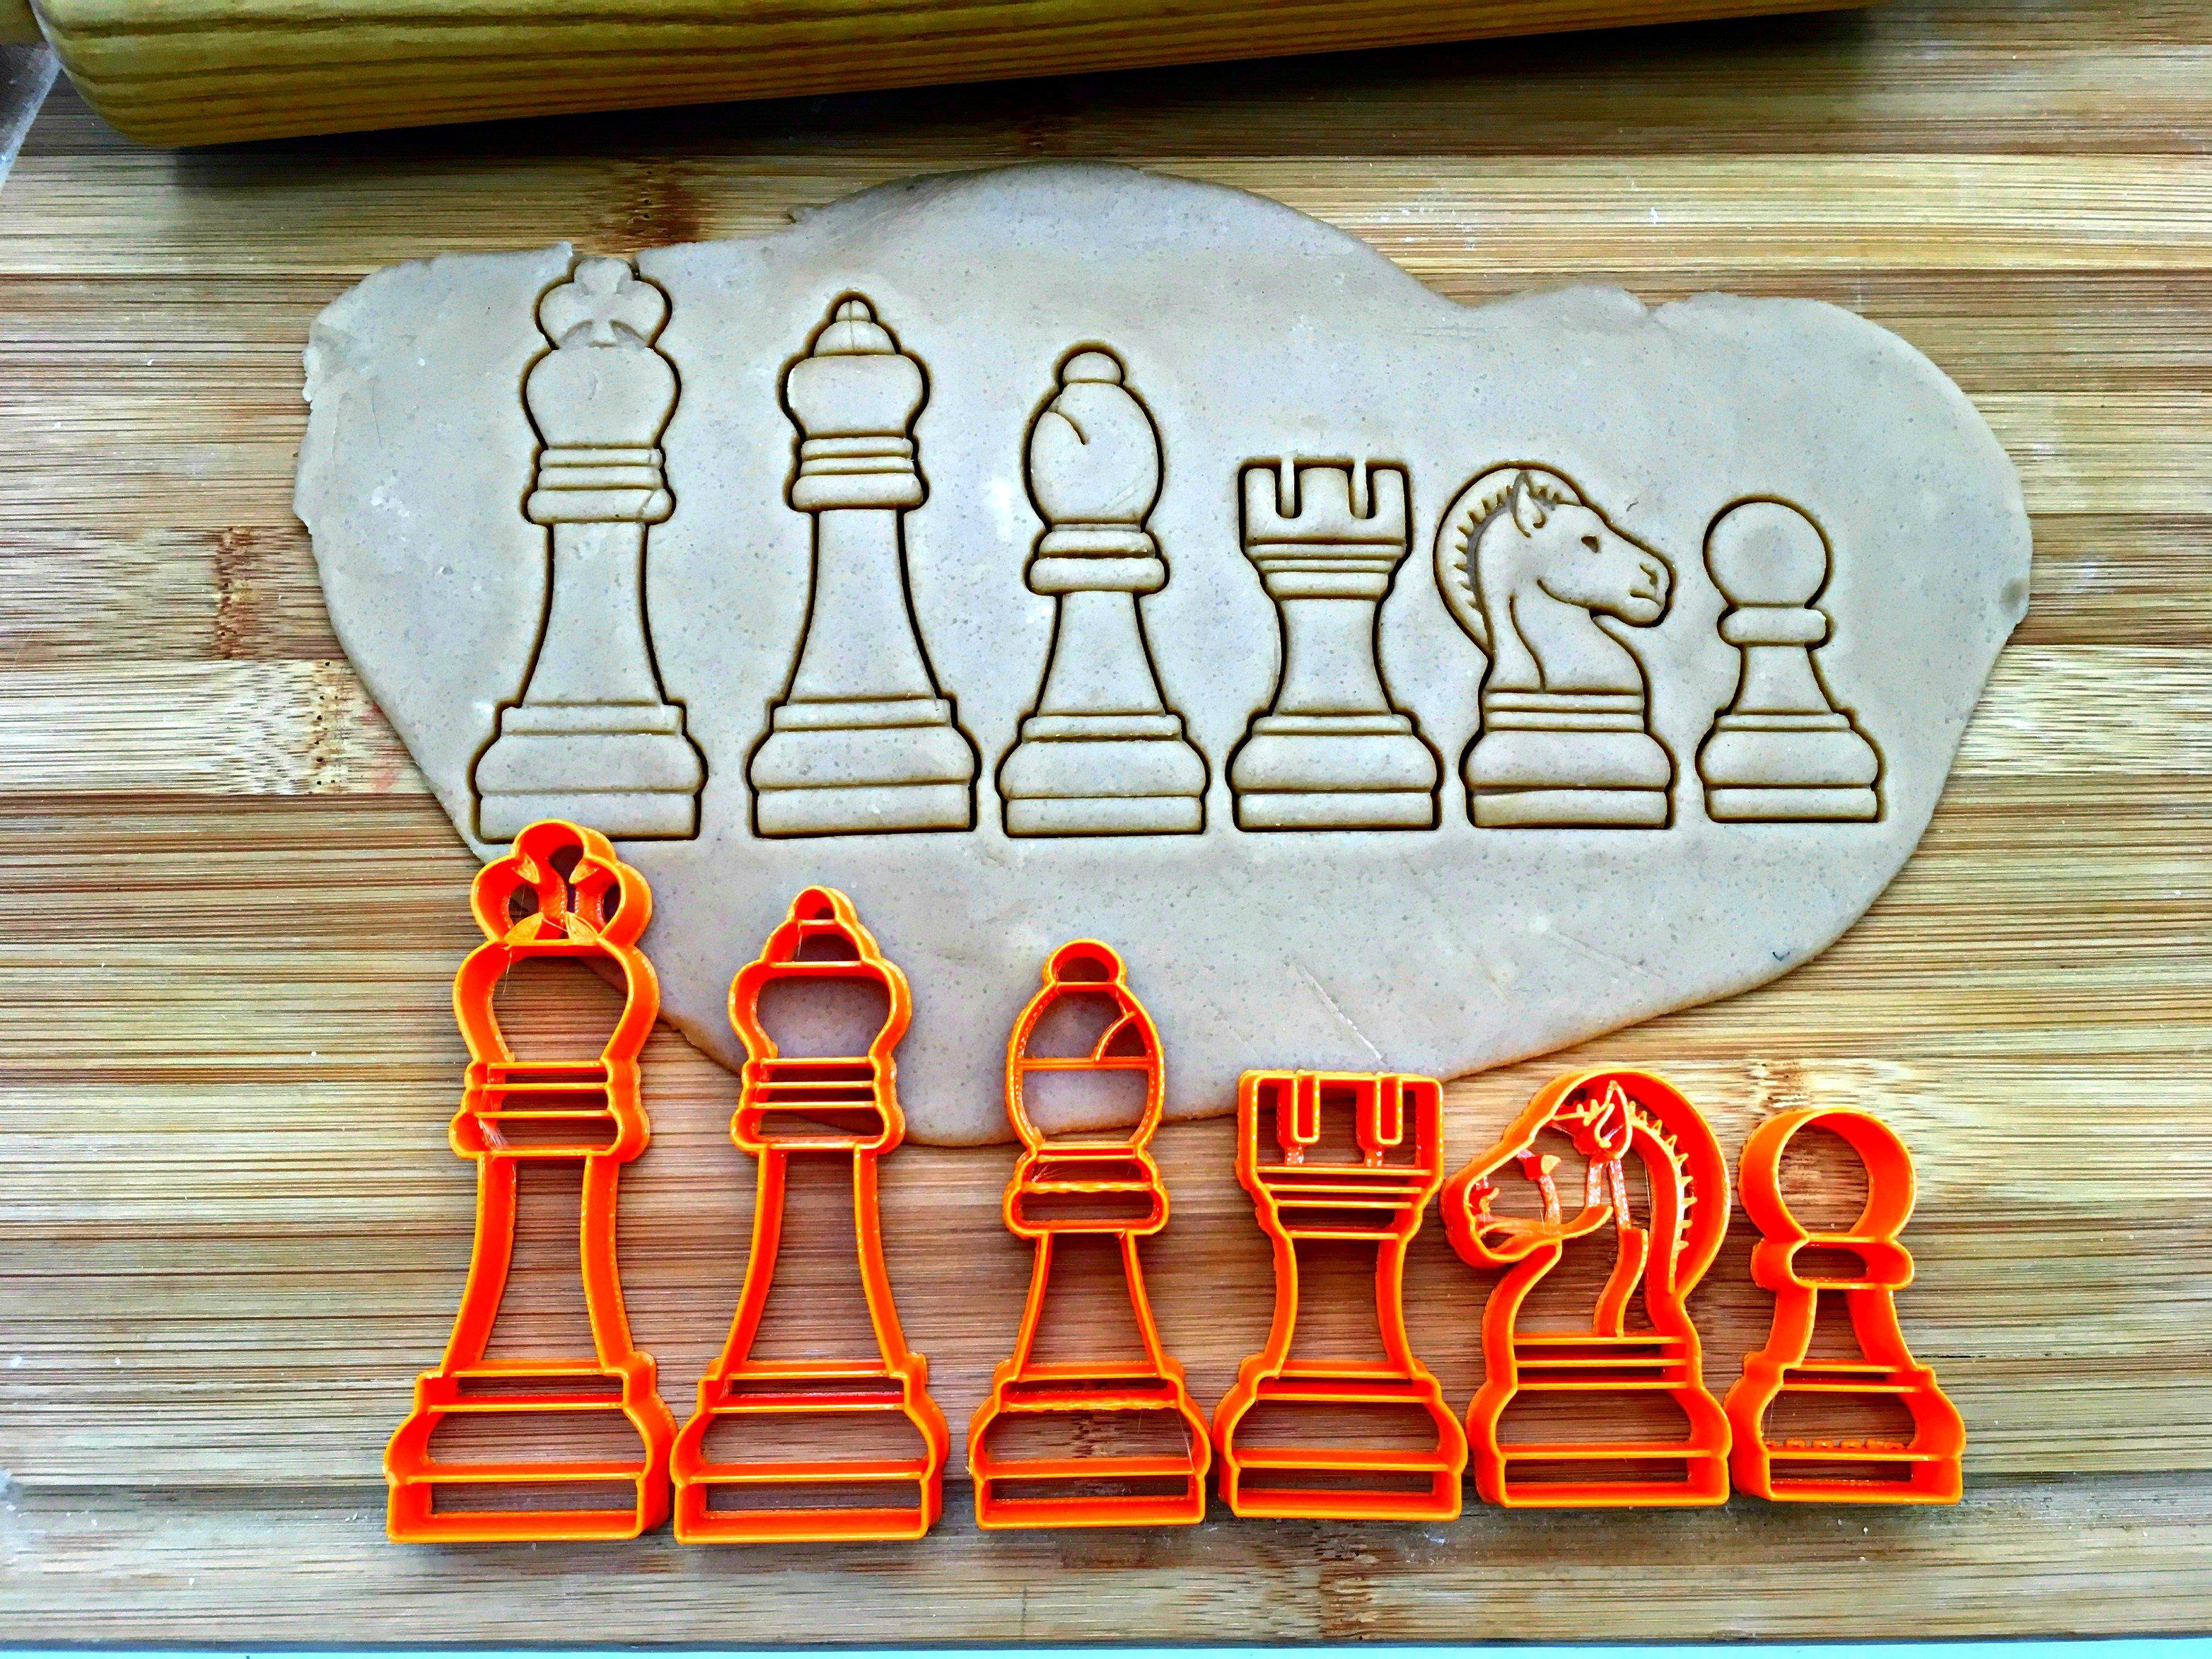 Set of 6 Chess Piece Cookie Cutters